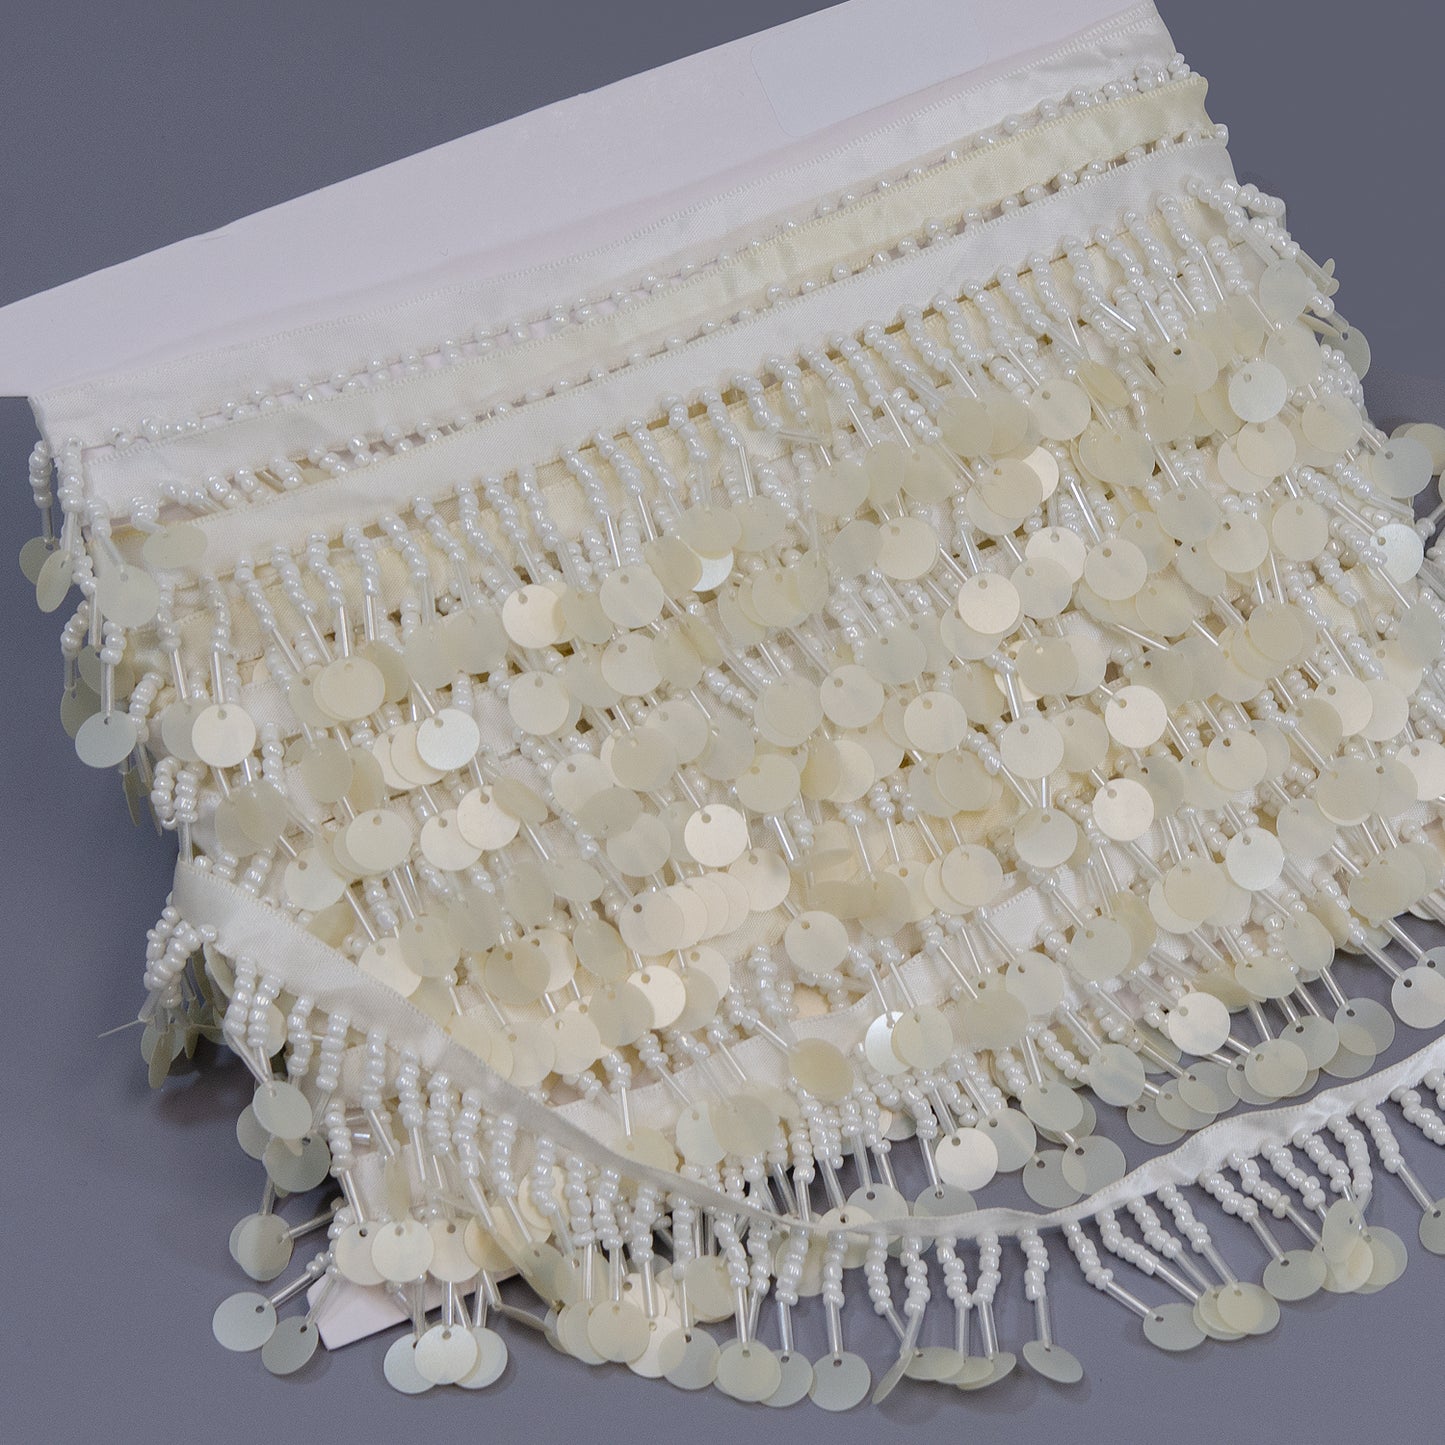 Lorraine 1-1/2" Beaded and Sequined Fringe Trim (Sold by the Yard)